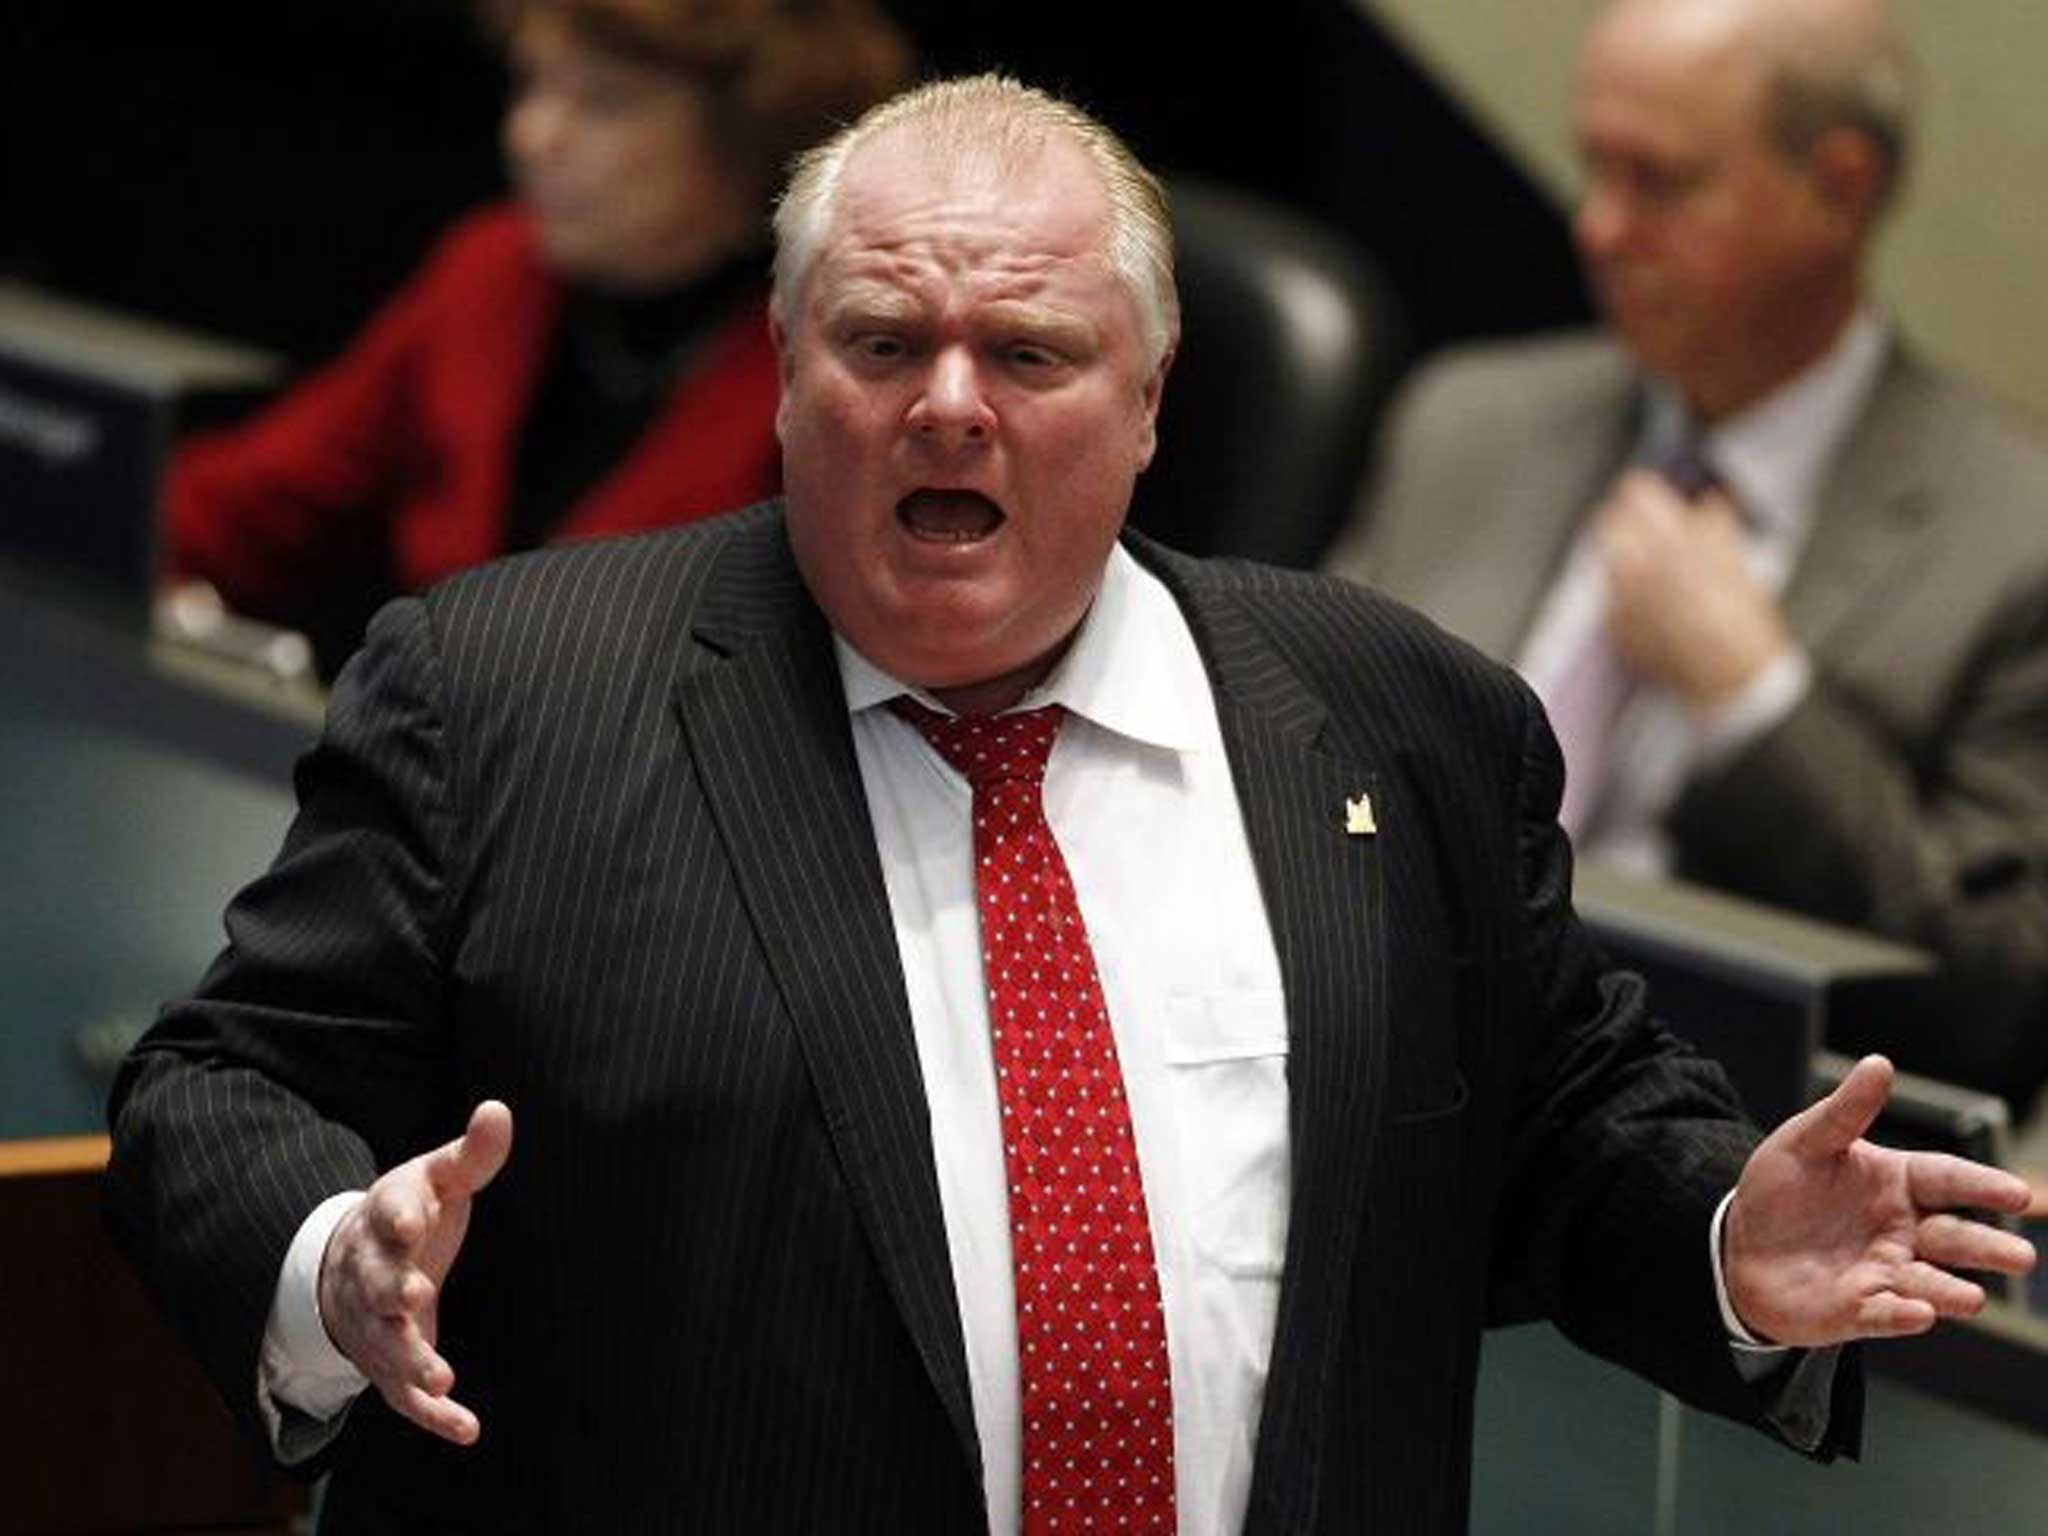 Rob Ford has been at the receiving end of a number of scandals